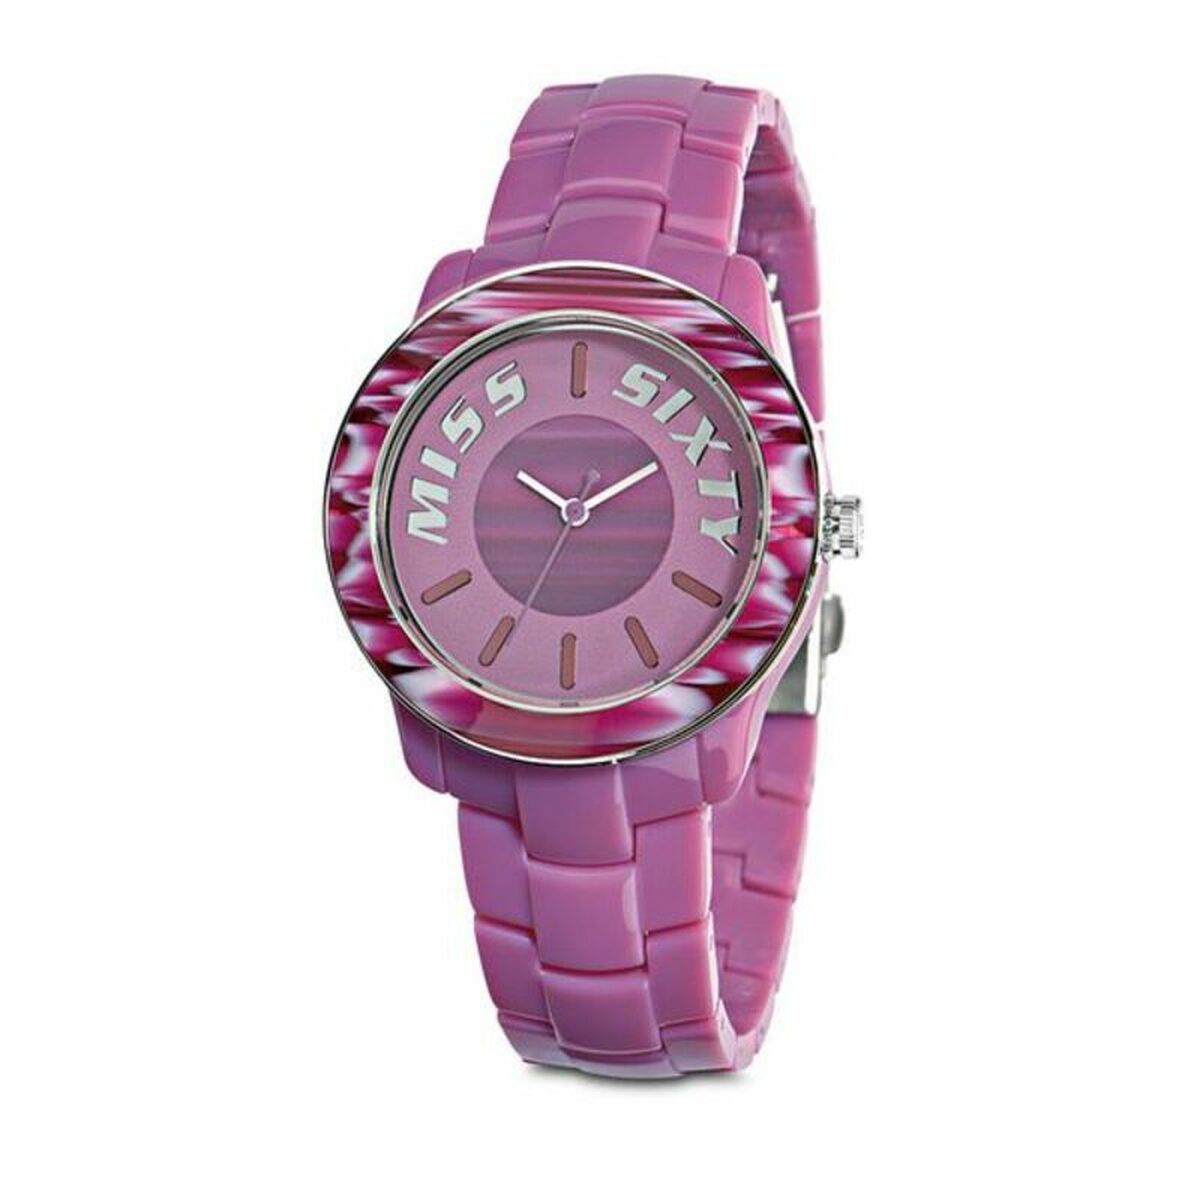 Ladies'Watch Miss Sixty R0753122502 (Ø 39 mm), Miss Sixty, Watches, Women, ladieswatch-miss-sixty-r0753122502-o-39-mm, : Quartz Movement, Brand_Miss Sixty, category-reference-2570, category-reference-2635, category-reference-2995, category-reference-t-19667, category-reference-t-19725, Condition_NEW, fashion, gifts for women, original gifts, Price_20 - 50, RiotNook